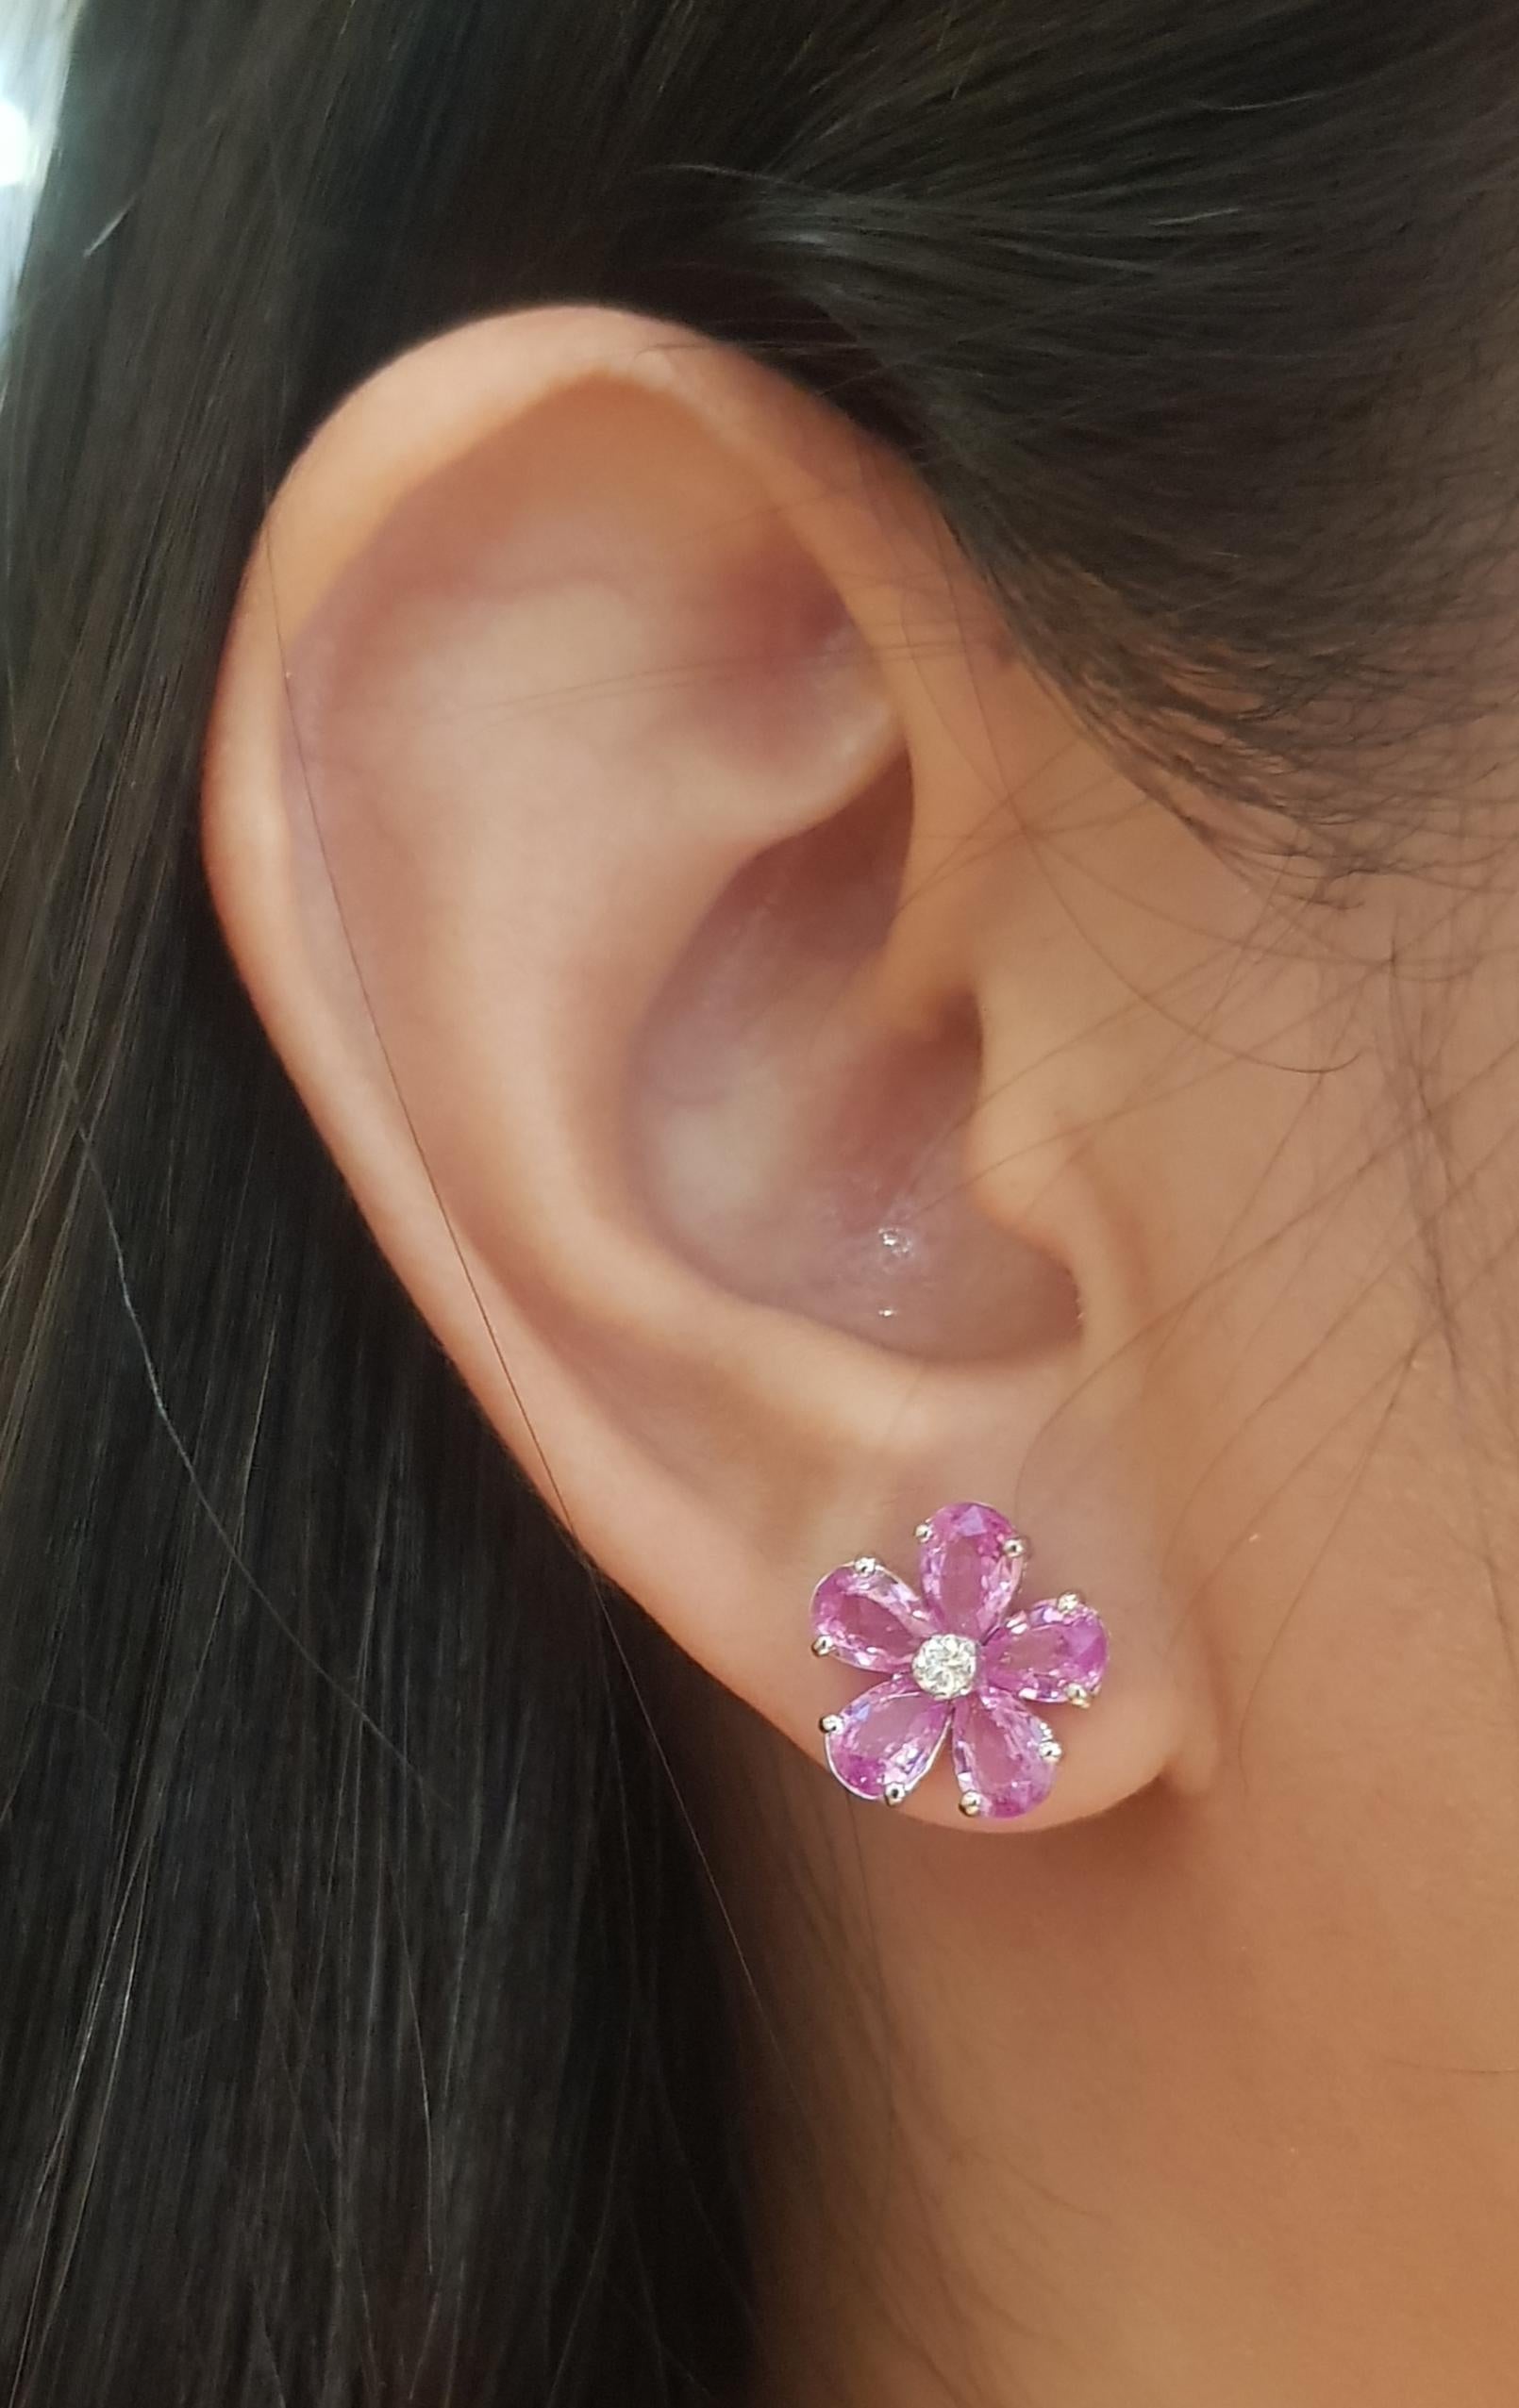 Pink Sapphire 4.60 carats with Diamond 0.09 carat Earrings set in 18K White Gold Settings

Width: 1.2 cm 
Length: 1.2 cm
Total Weight: 4.34 grams

